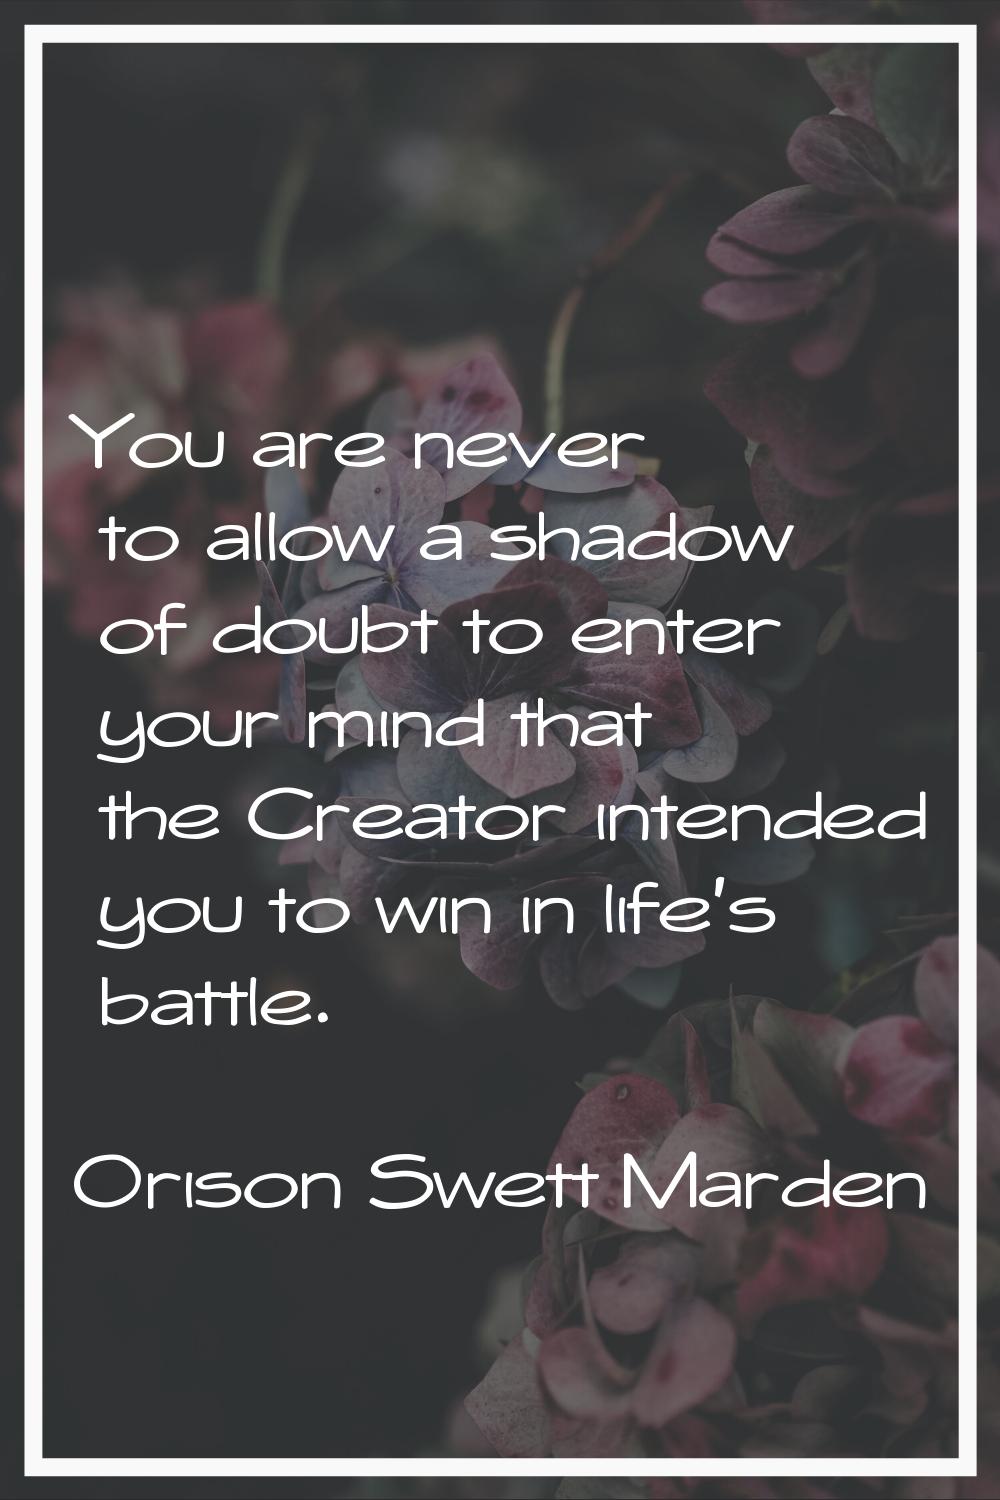 You are never to allow a shadow of doubt to enter your mind that the Creator intended you to win in